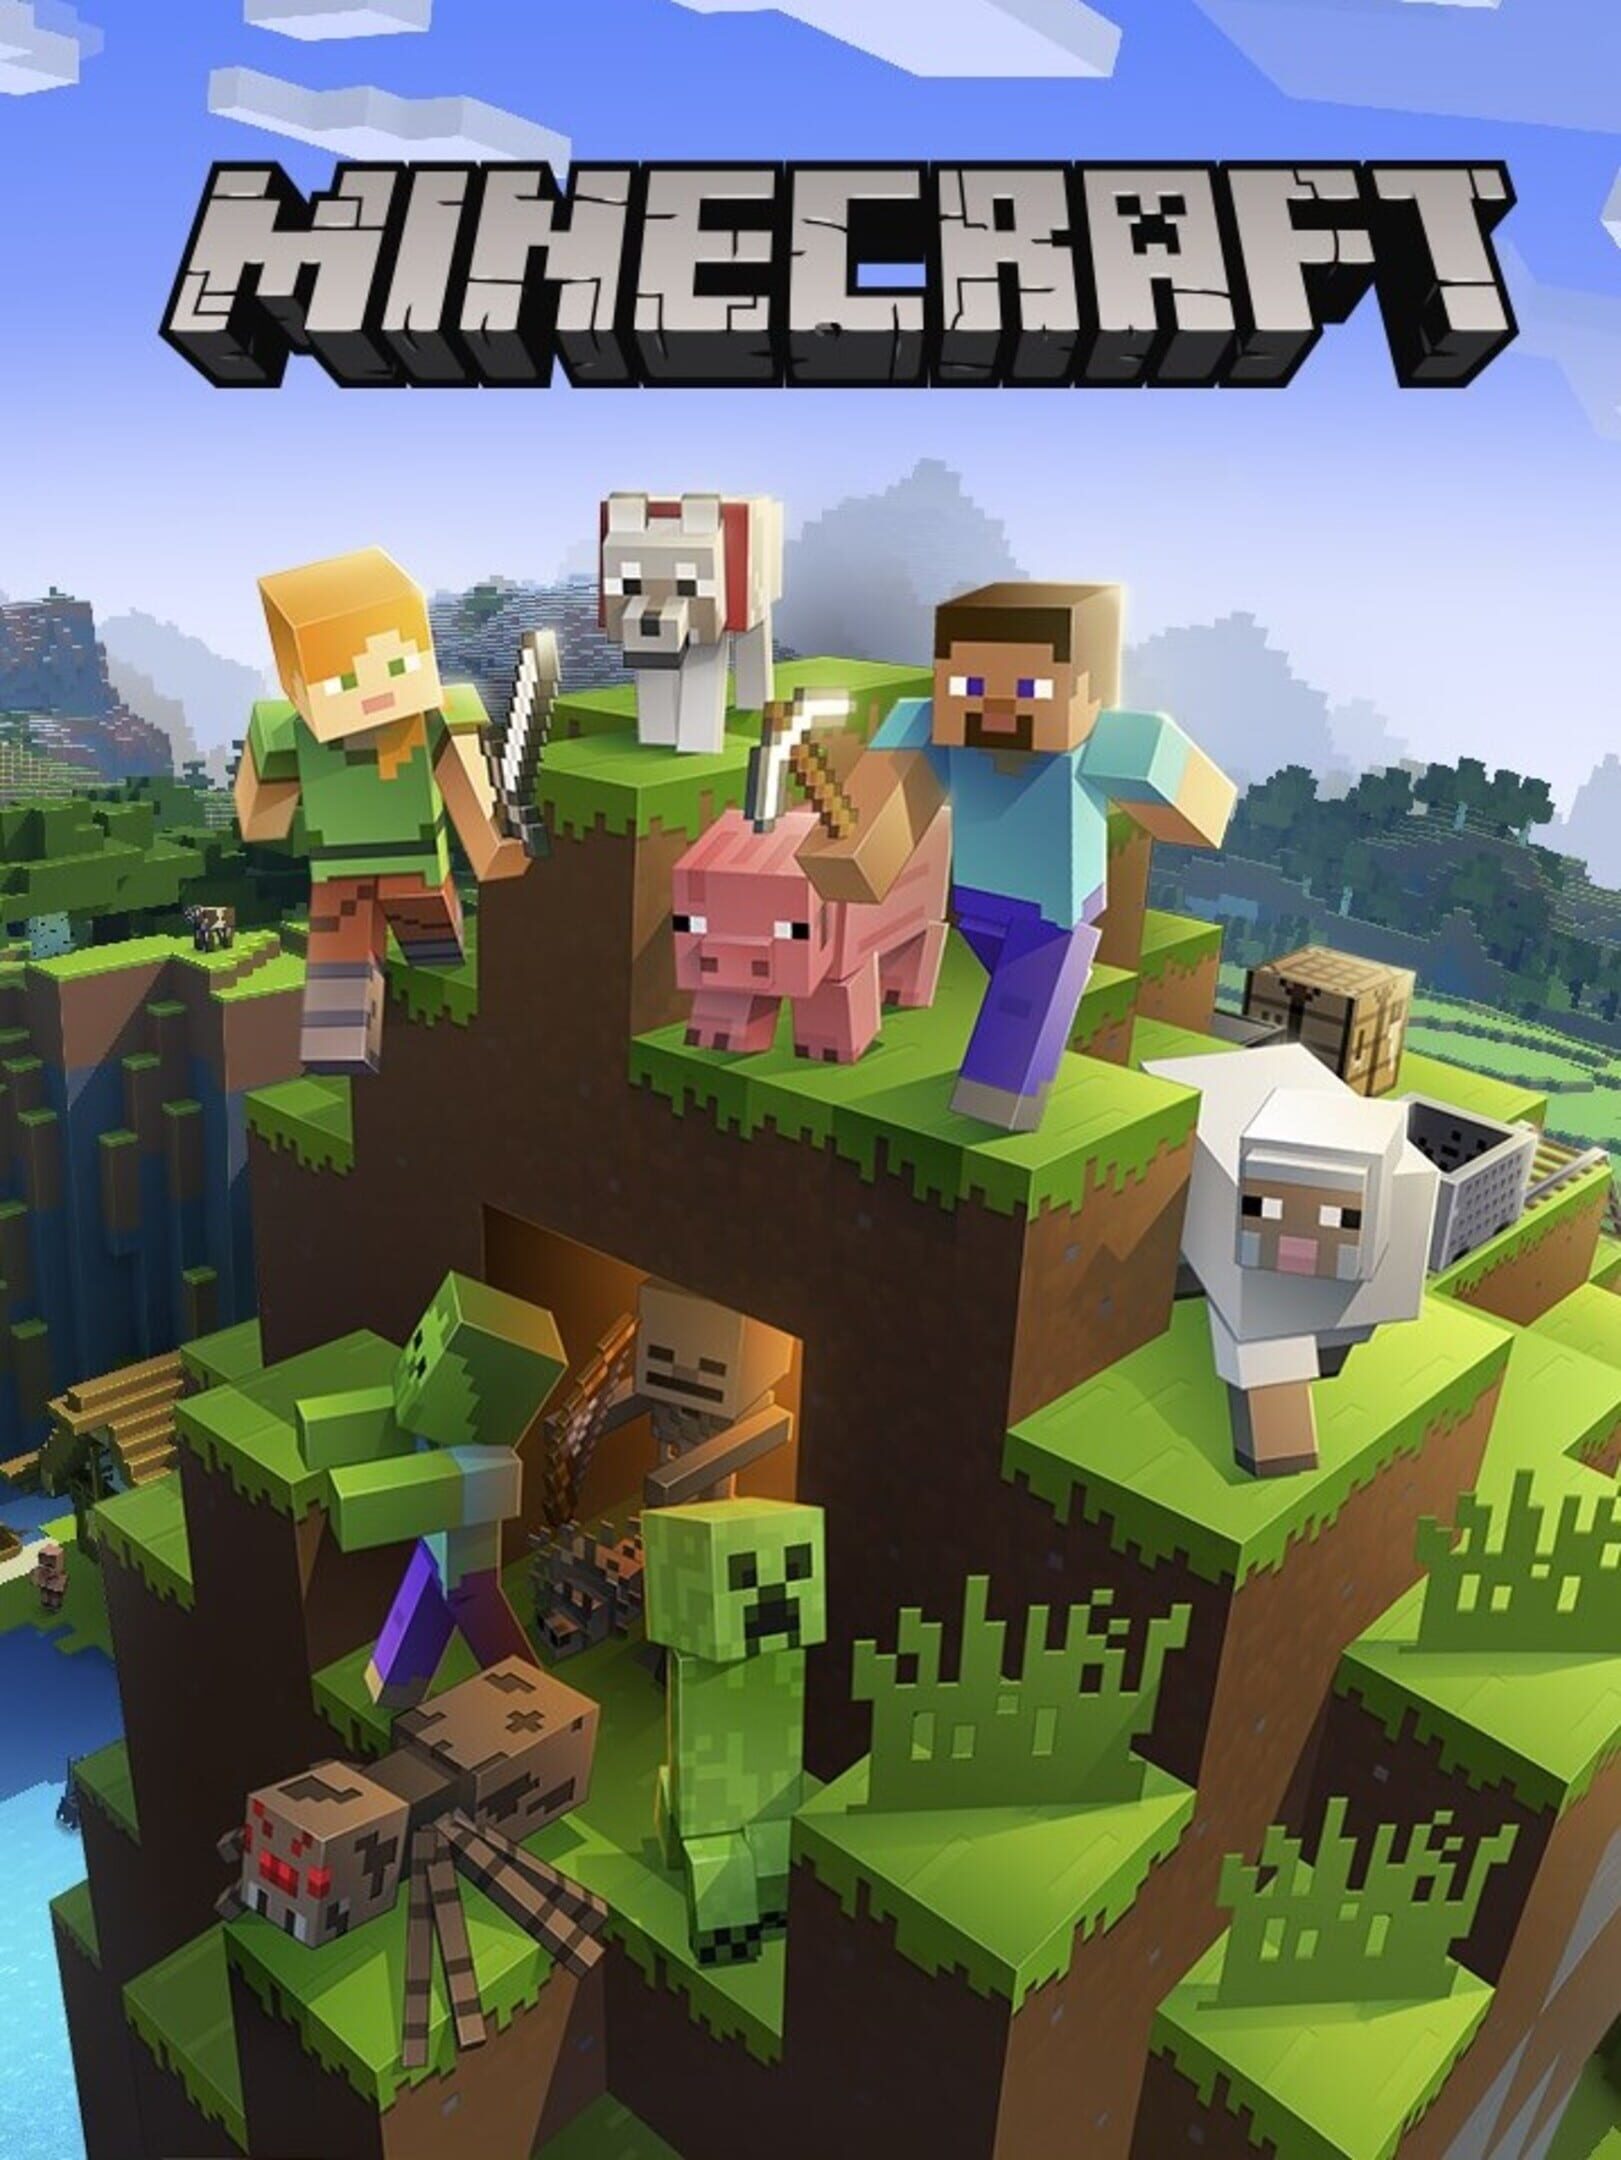 Minecraft Legends Review (PC, PS5, Xbox, Switch) - GameRevolution